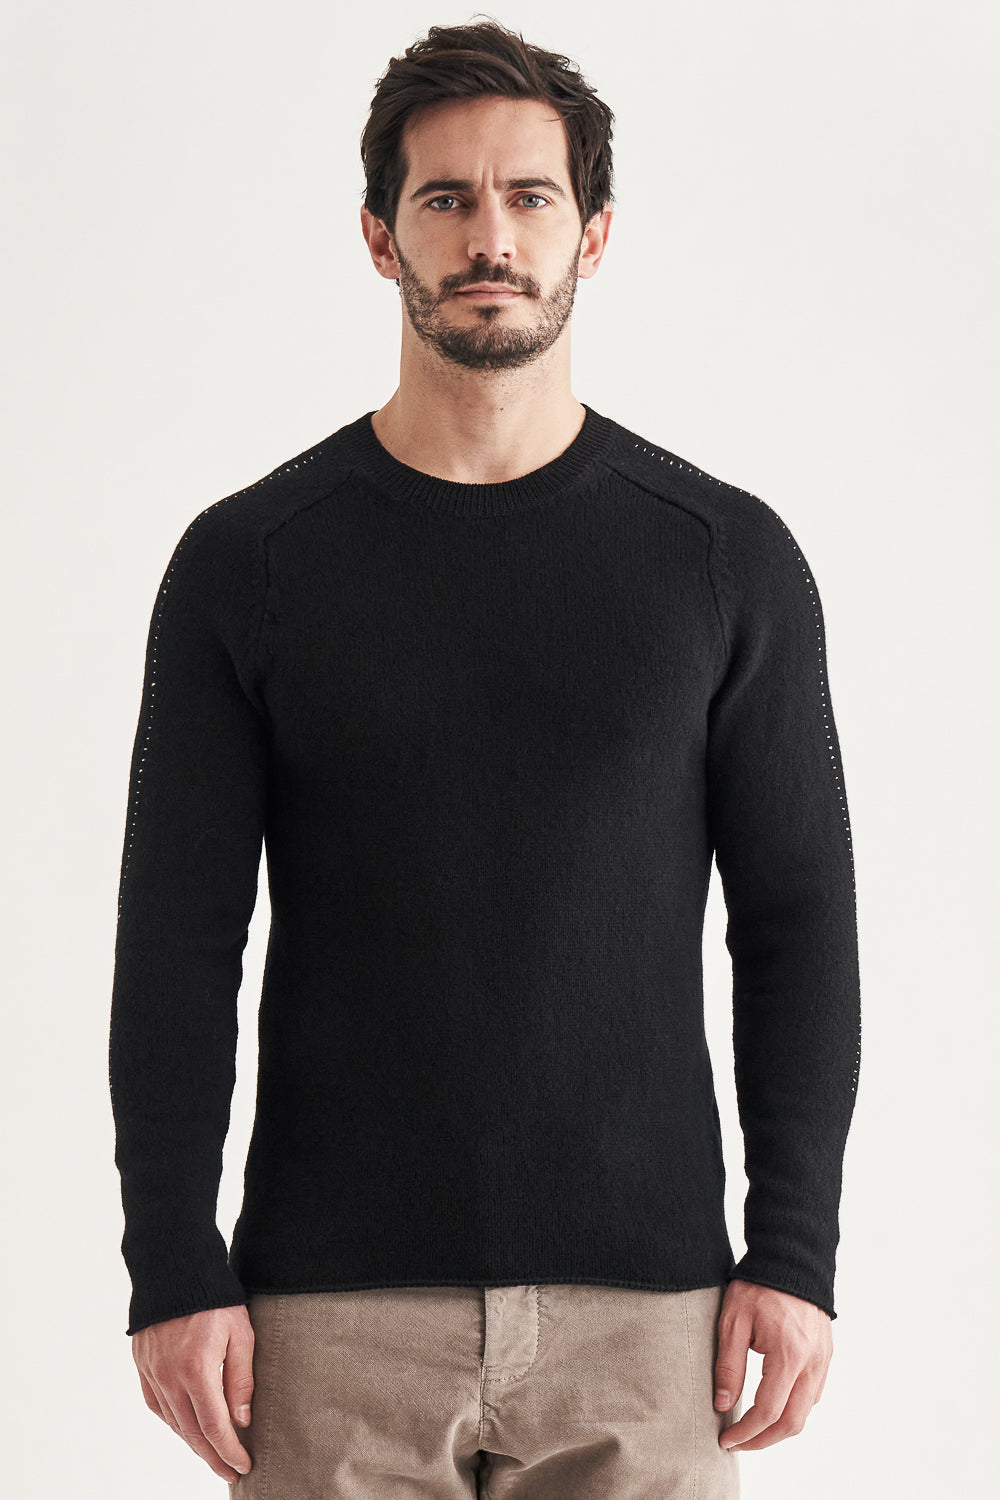 Buy the Transit Cable Virgin Wool Roundneck Knit in Black at Intro. Spend £50 for free UK delivery. Official stockists. We ship worldwide.